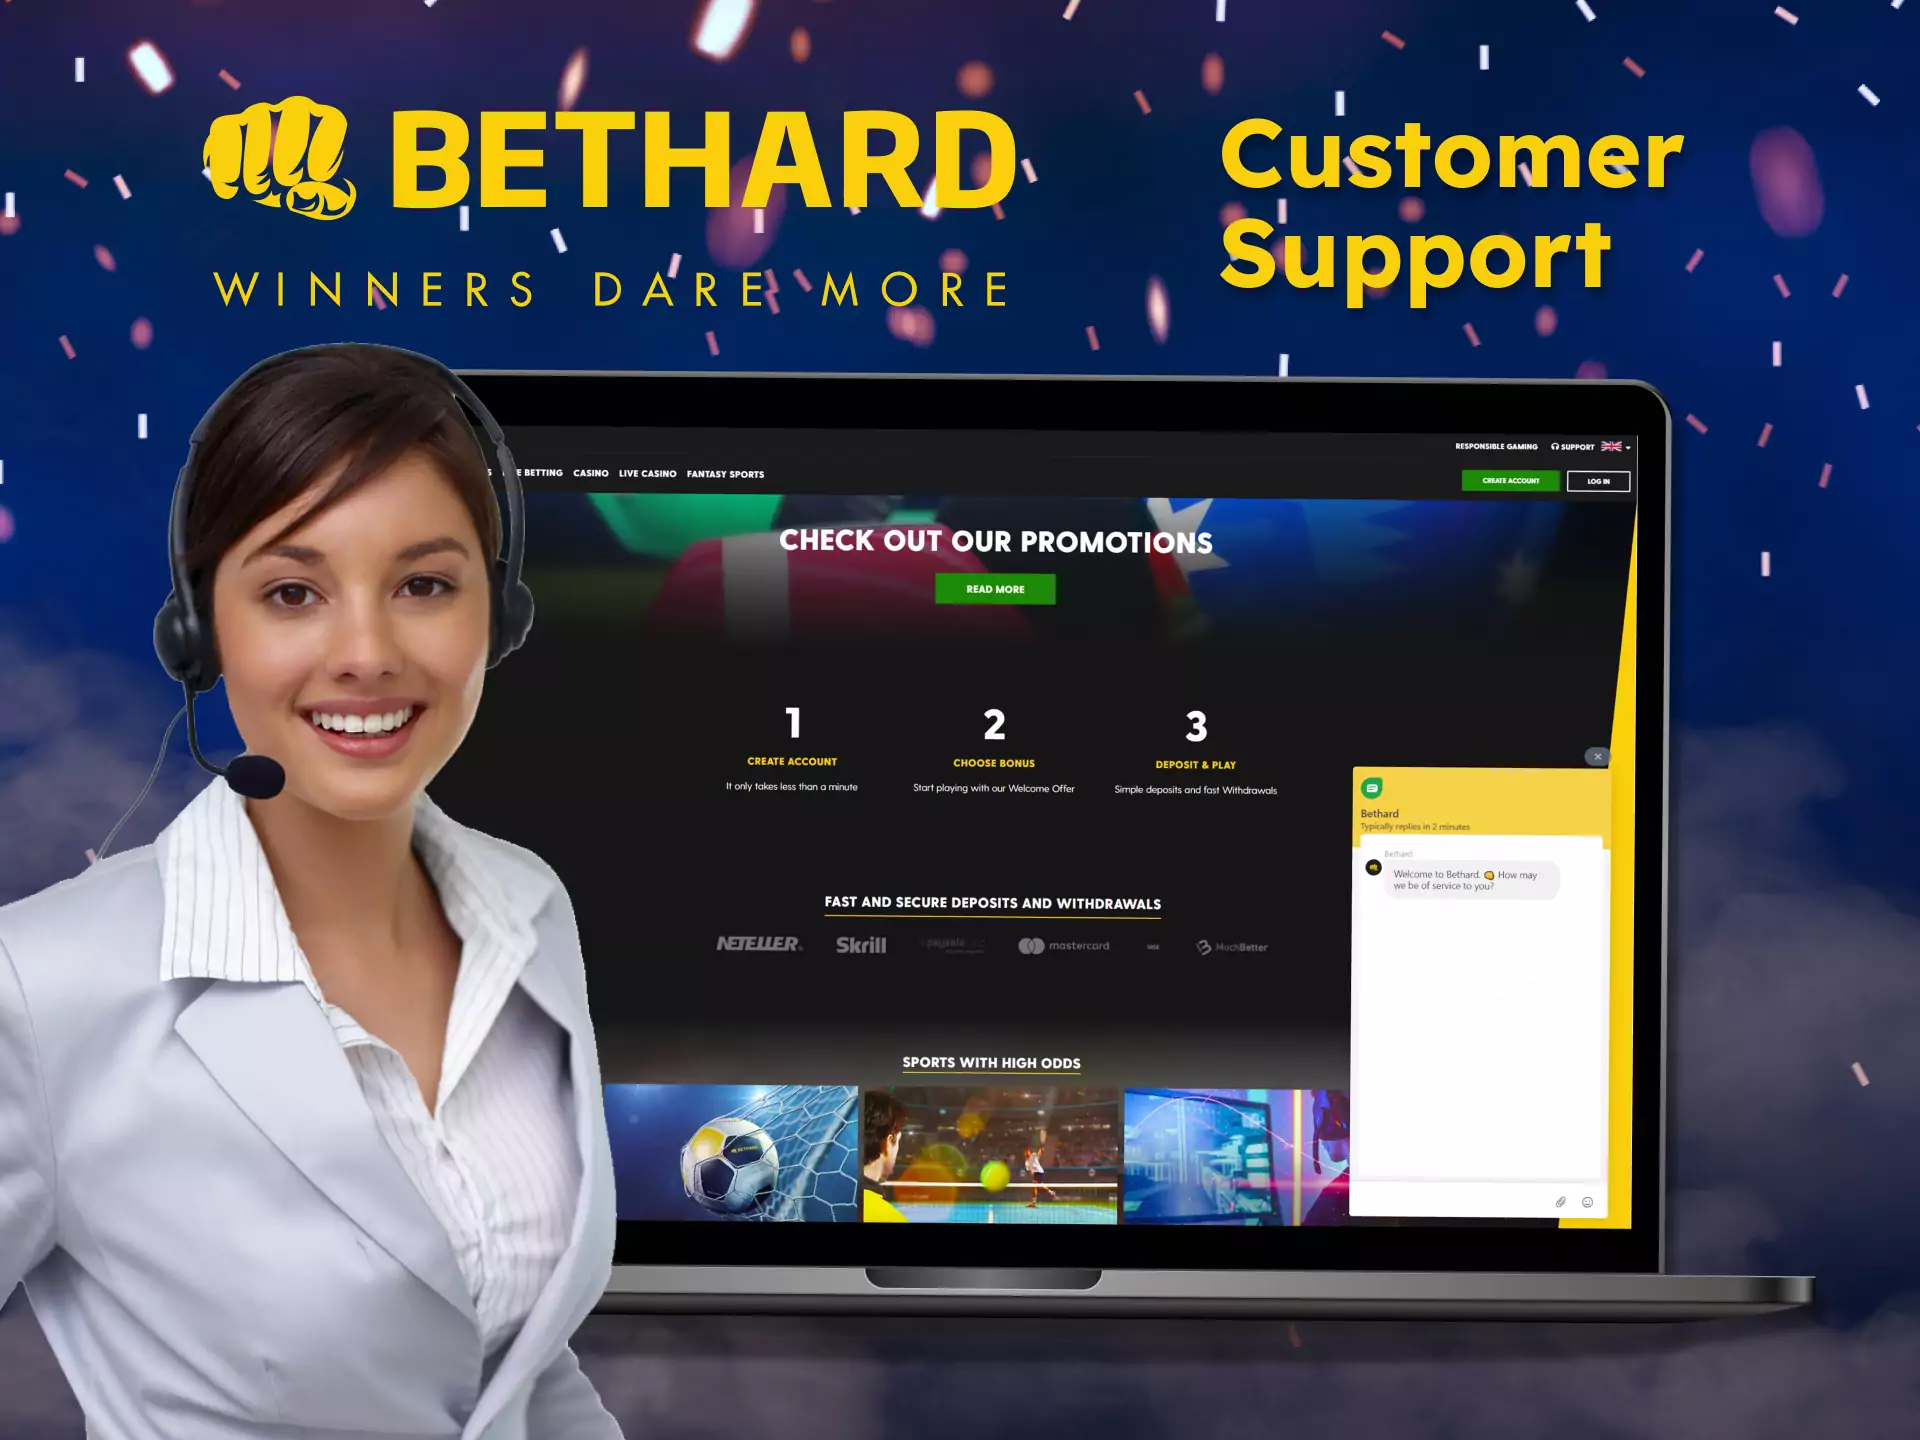 The Bethard support staff is always ready to answer questions and help in any situation.